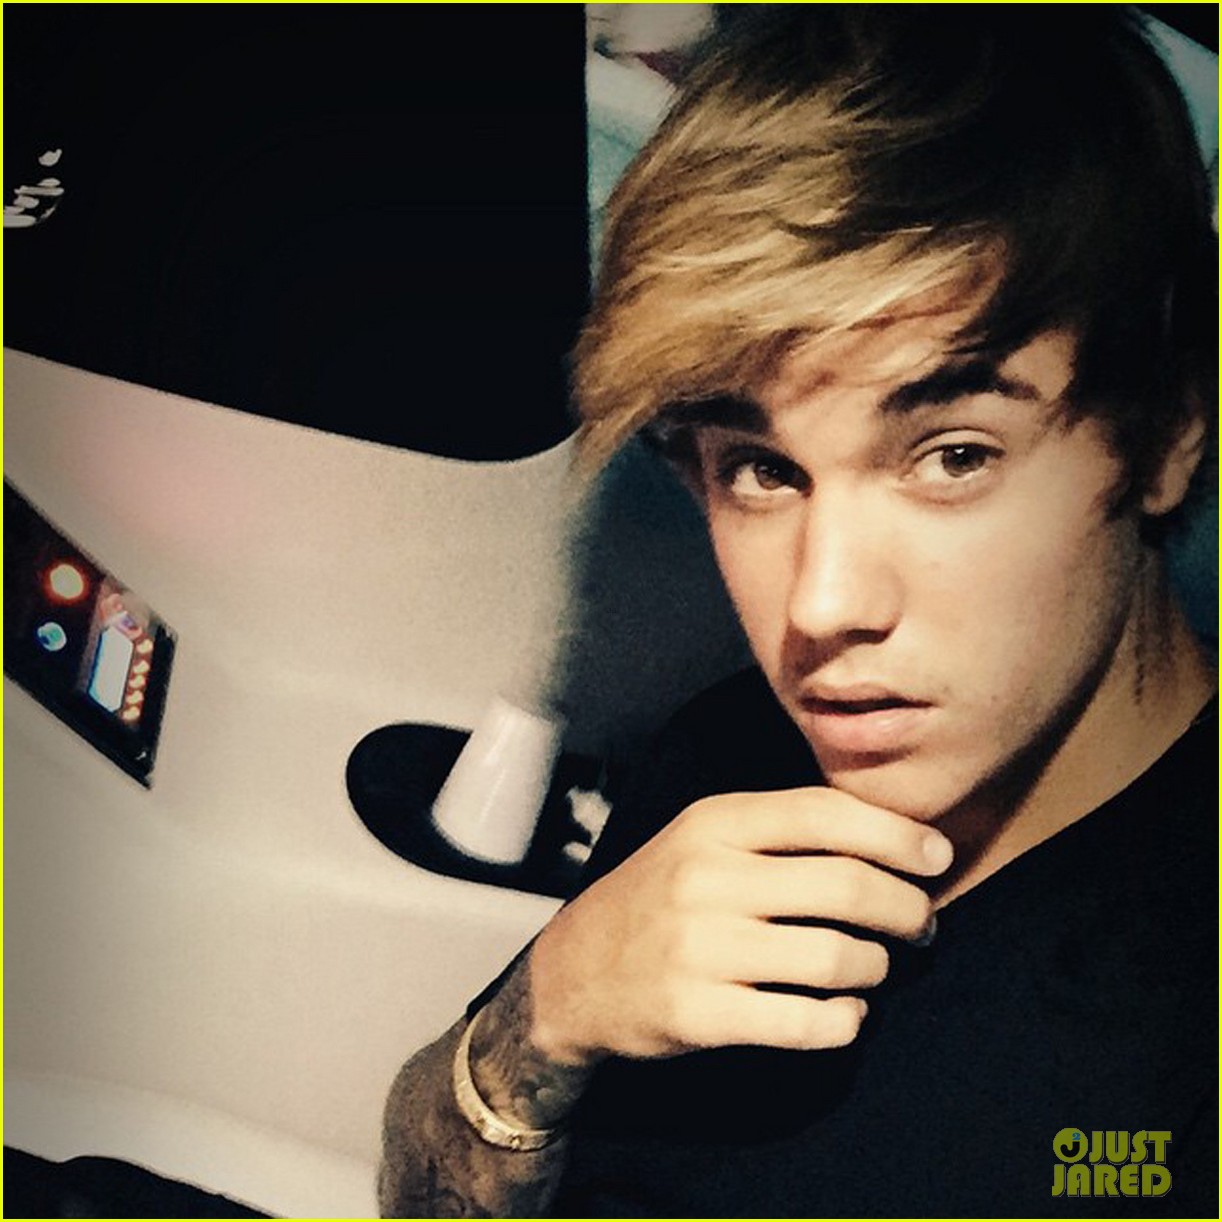 Boys paying top dollar for Justin Bieber's hairstyle - 9Celebrity-hkpdtq2012.edu.vn